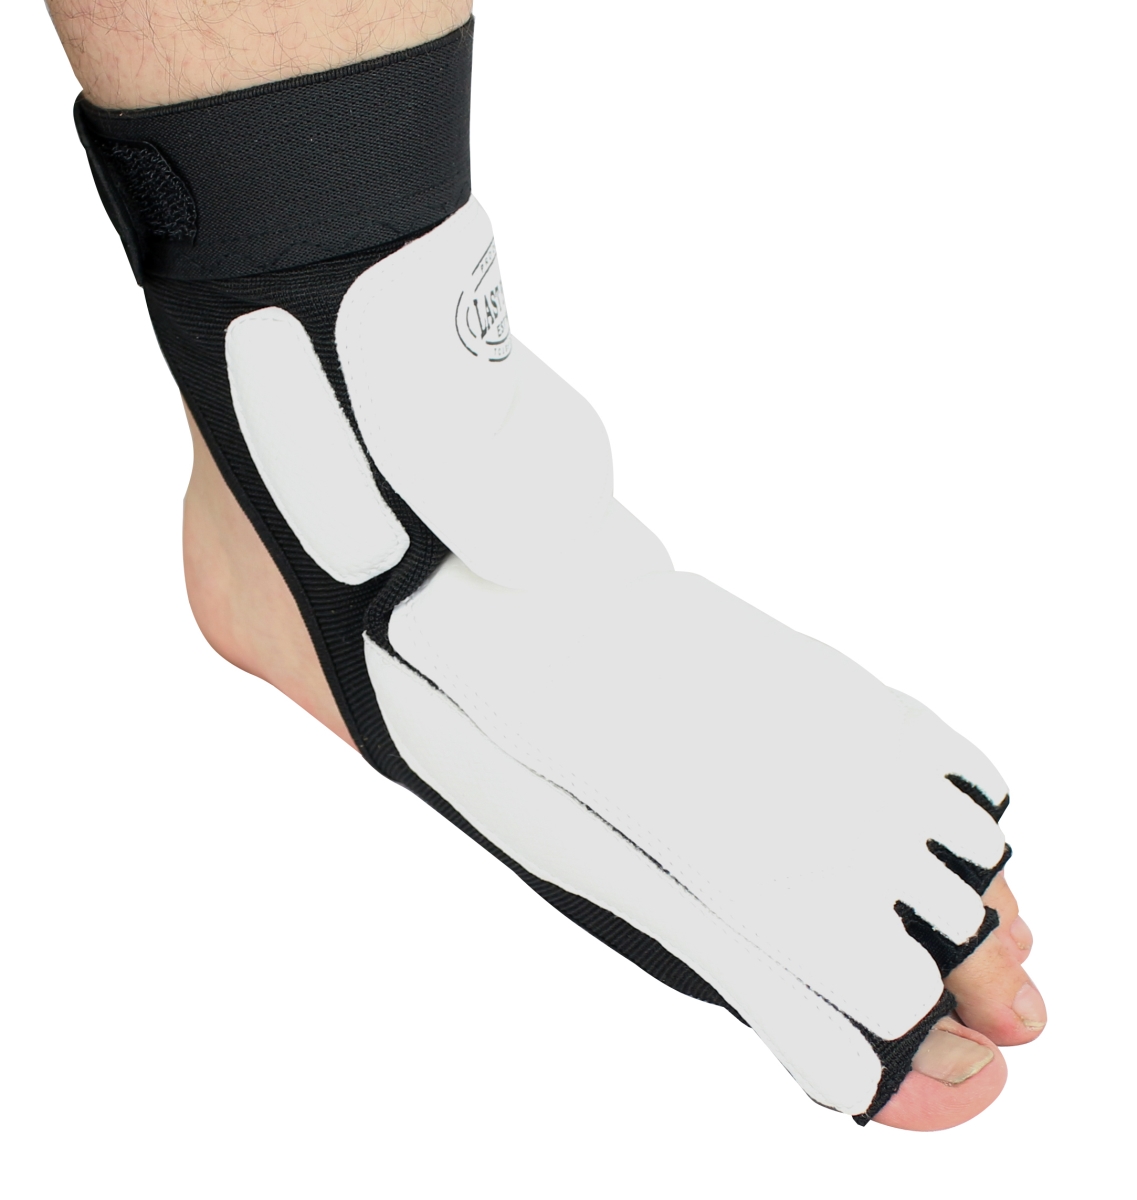 High Quality Taekwondo Foot Ankle Support Protector Kick Boxing Footwear - Small